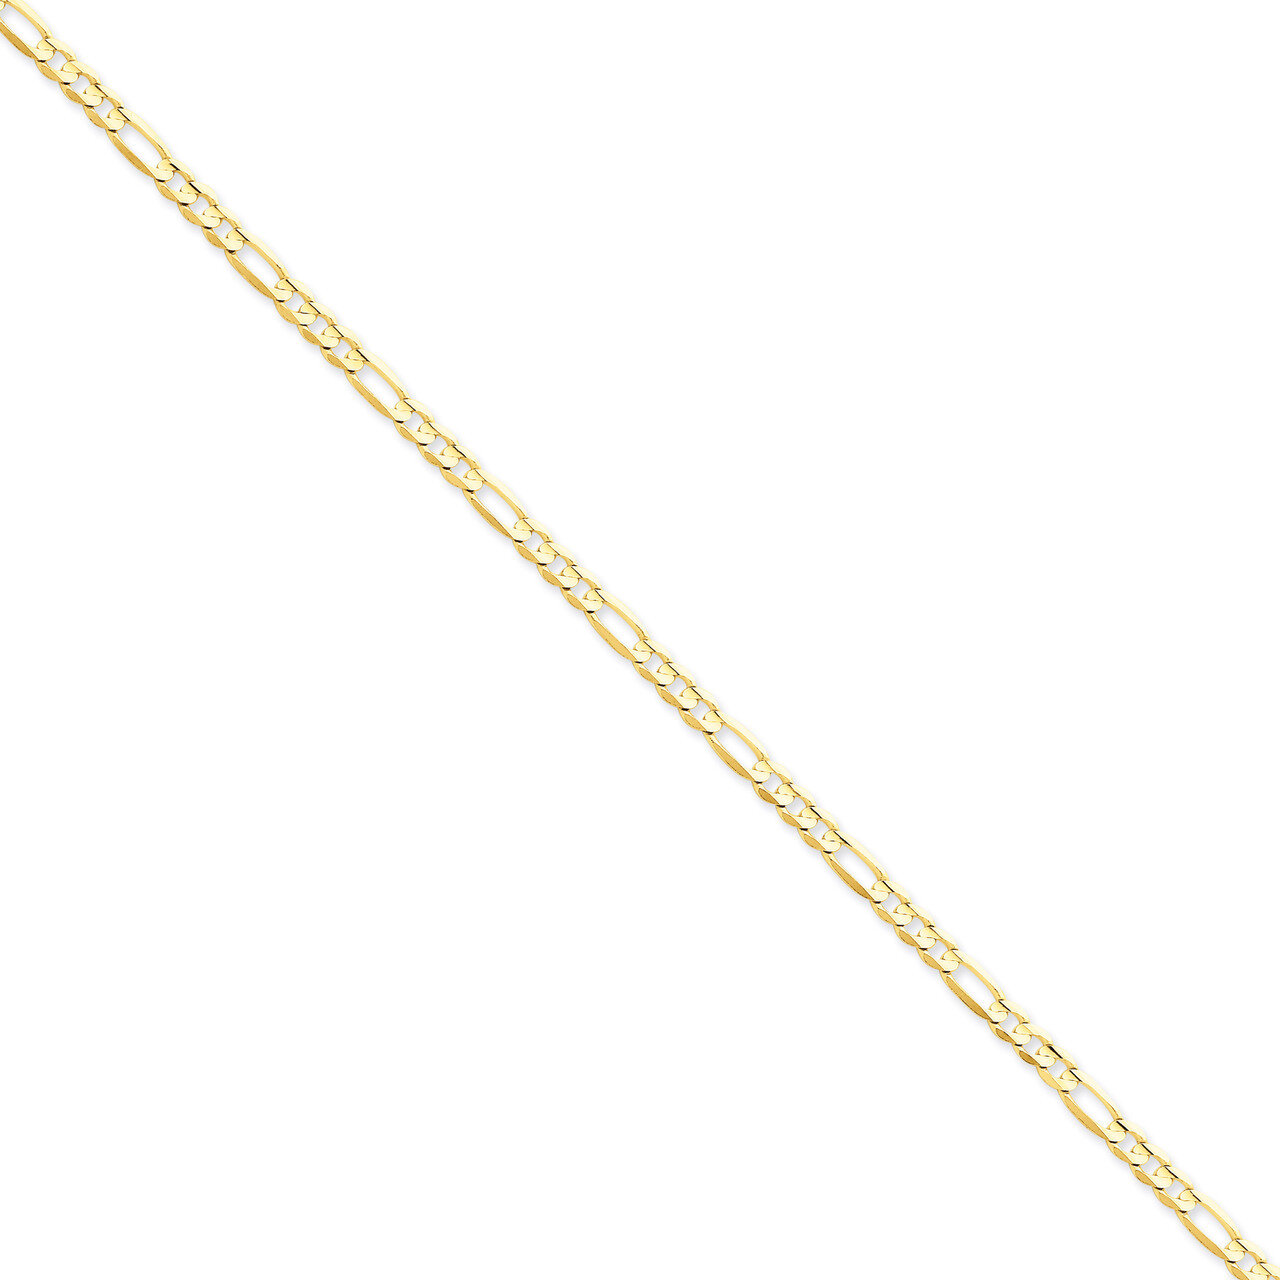 4mm Concave Open Figaro Chain 7 Inch 14k Gold LFG100-7